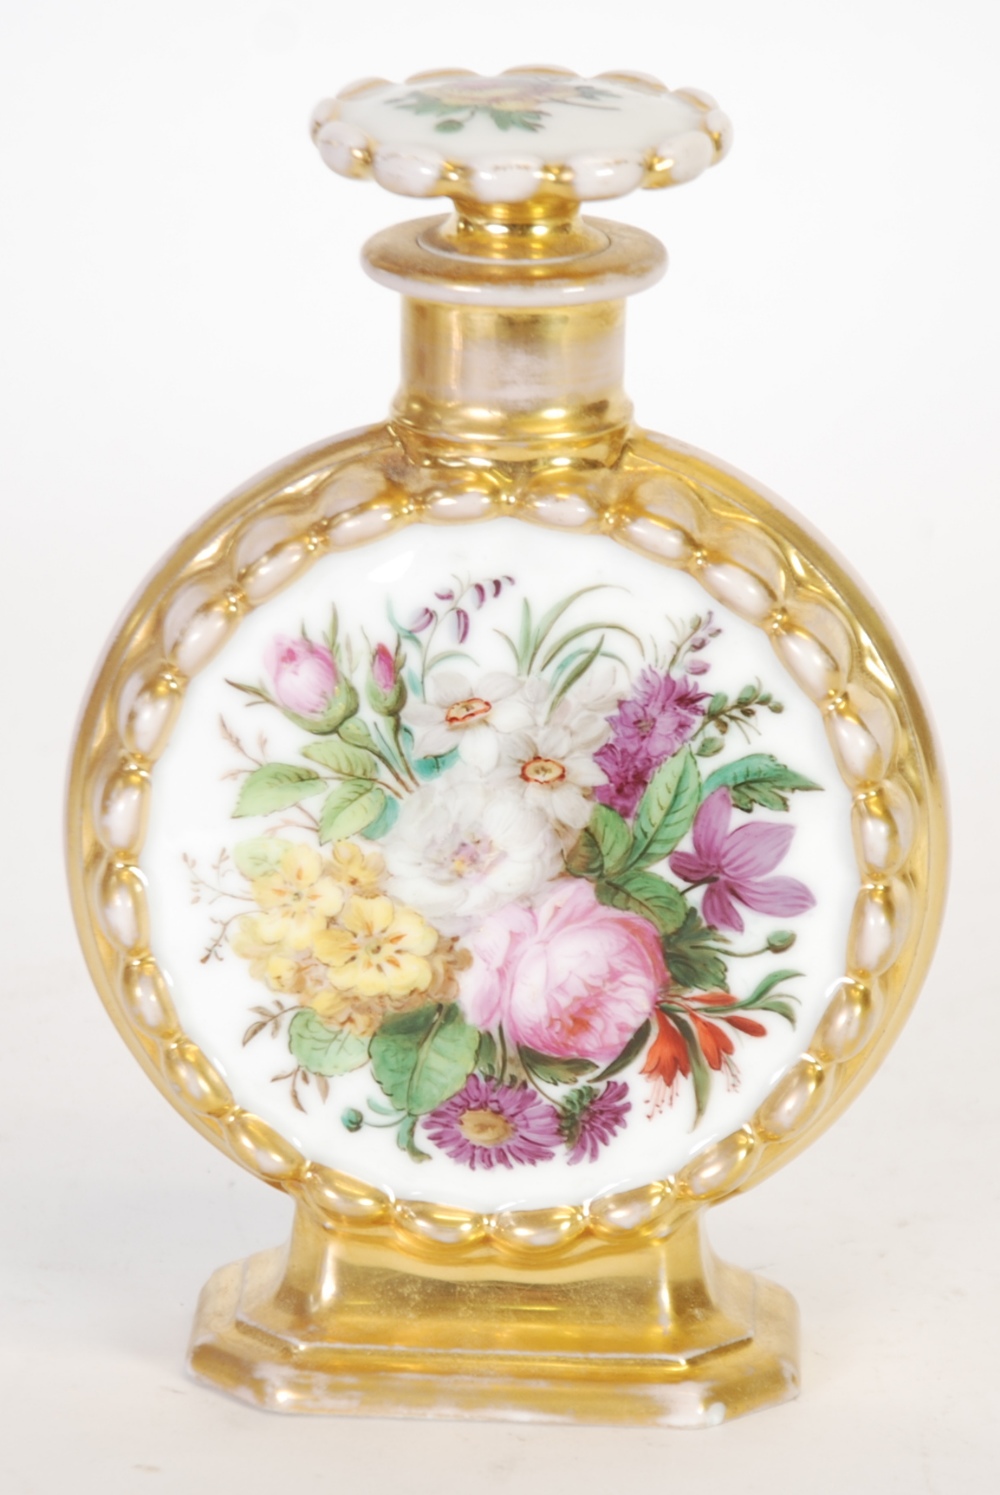 NINETEENTH CENTURY FRENCH PORCELAIN  FLATTENED CIRCULAR PERFUME FLASK with mushroom stopper, well